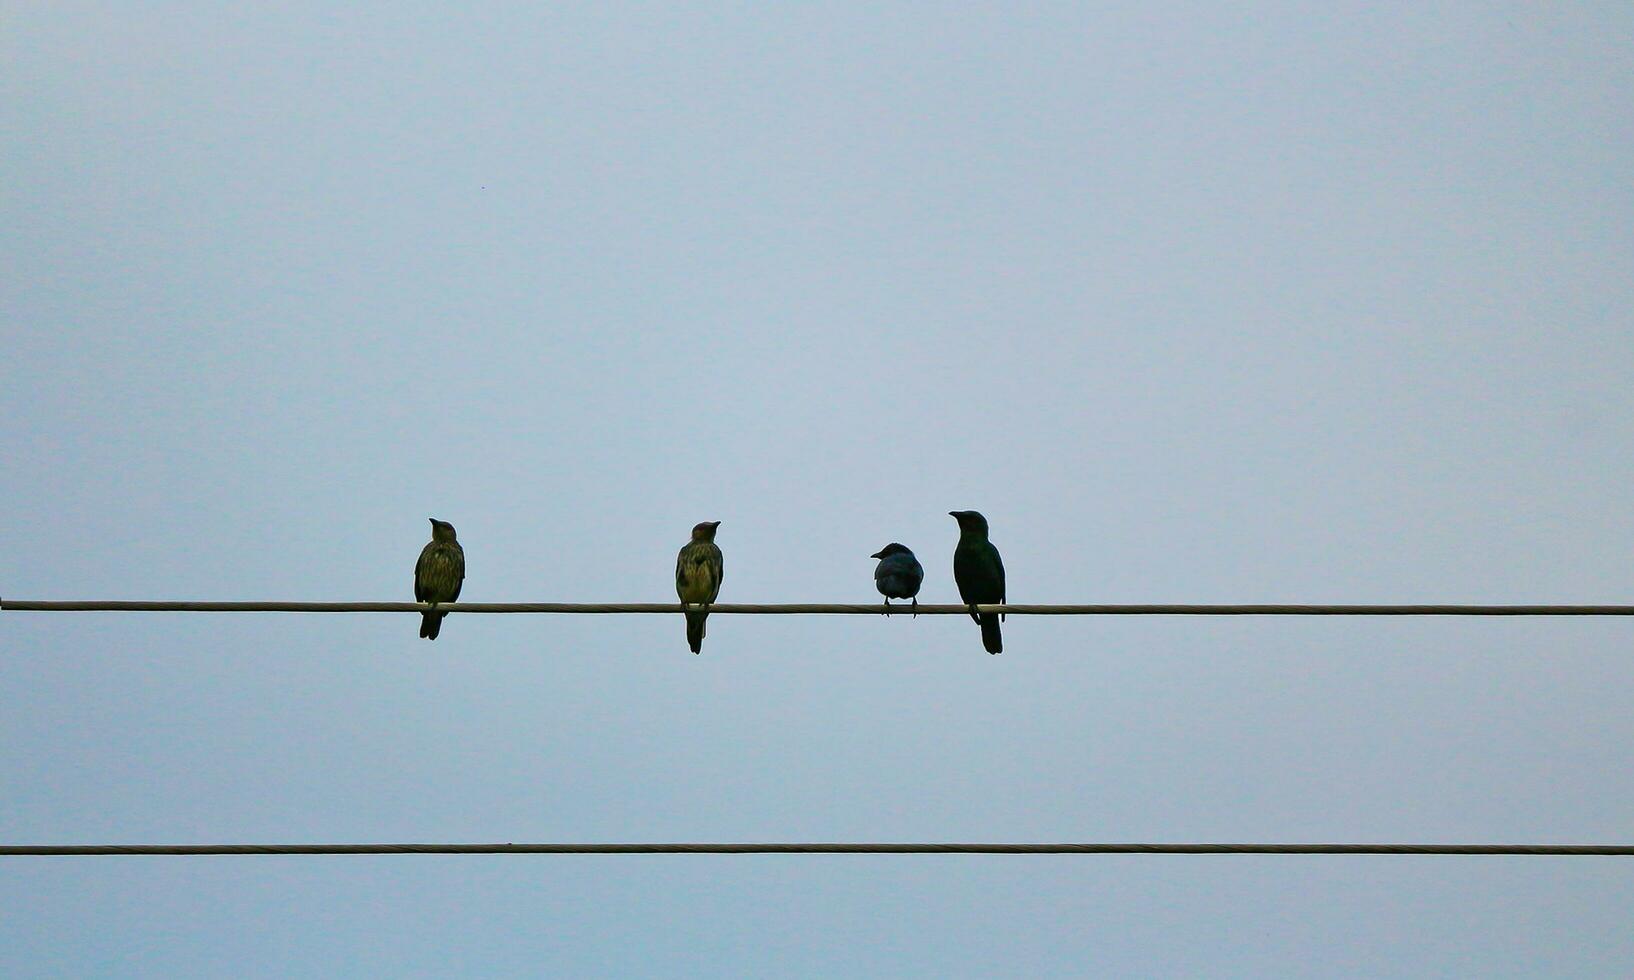 Four sparrows are perched on a piece of electric cable against the blue sky photo